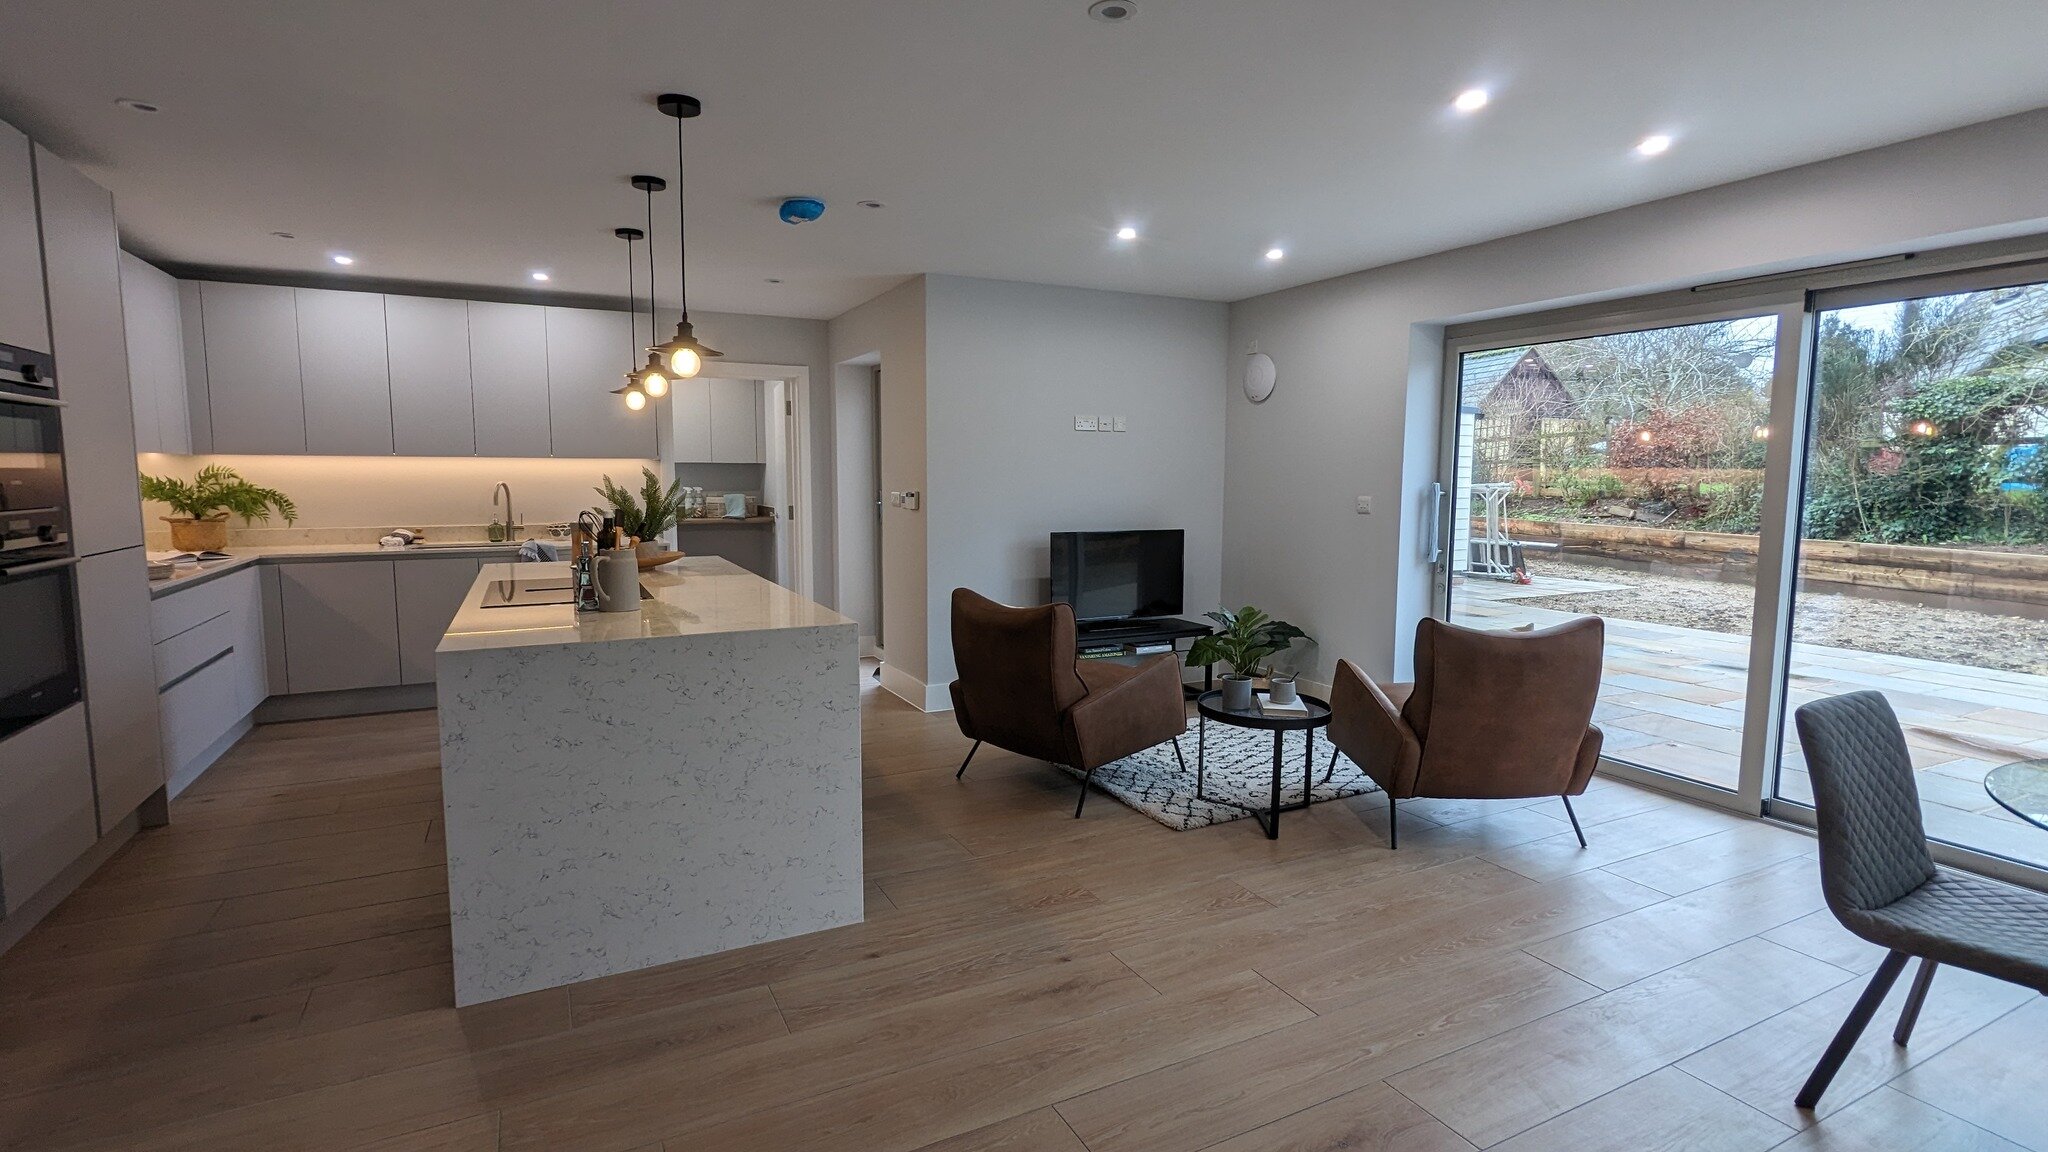 Check out our latest blog post and take a virtual tour of a large open-plan show home that we staged at the beginning of the year🏡

Head over to our website or follow the link in our bio📍

#interiorstaging #stagingblog #beforeandafter #showhomestag